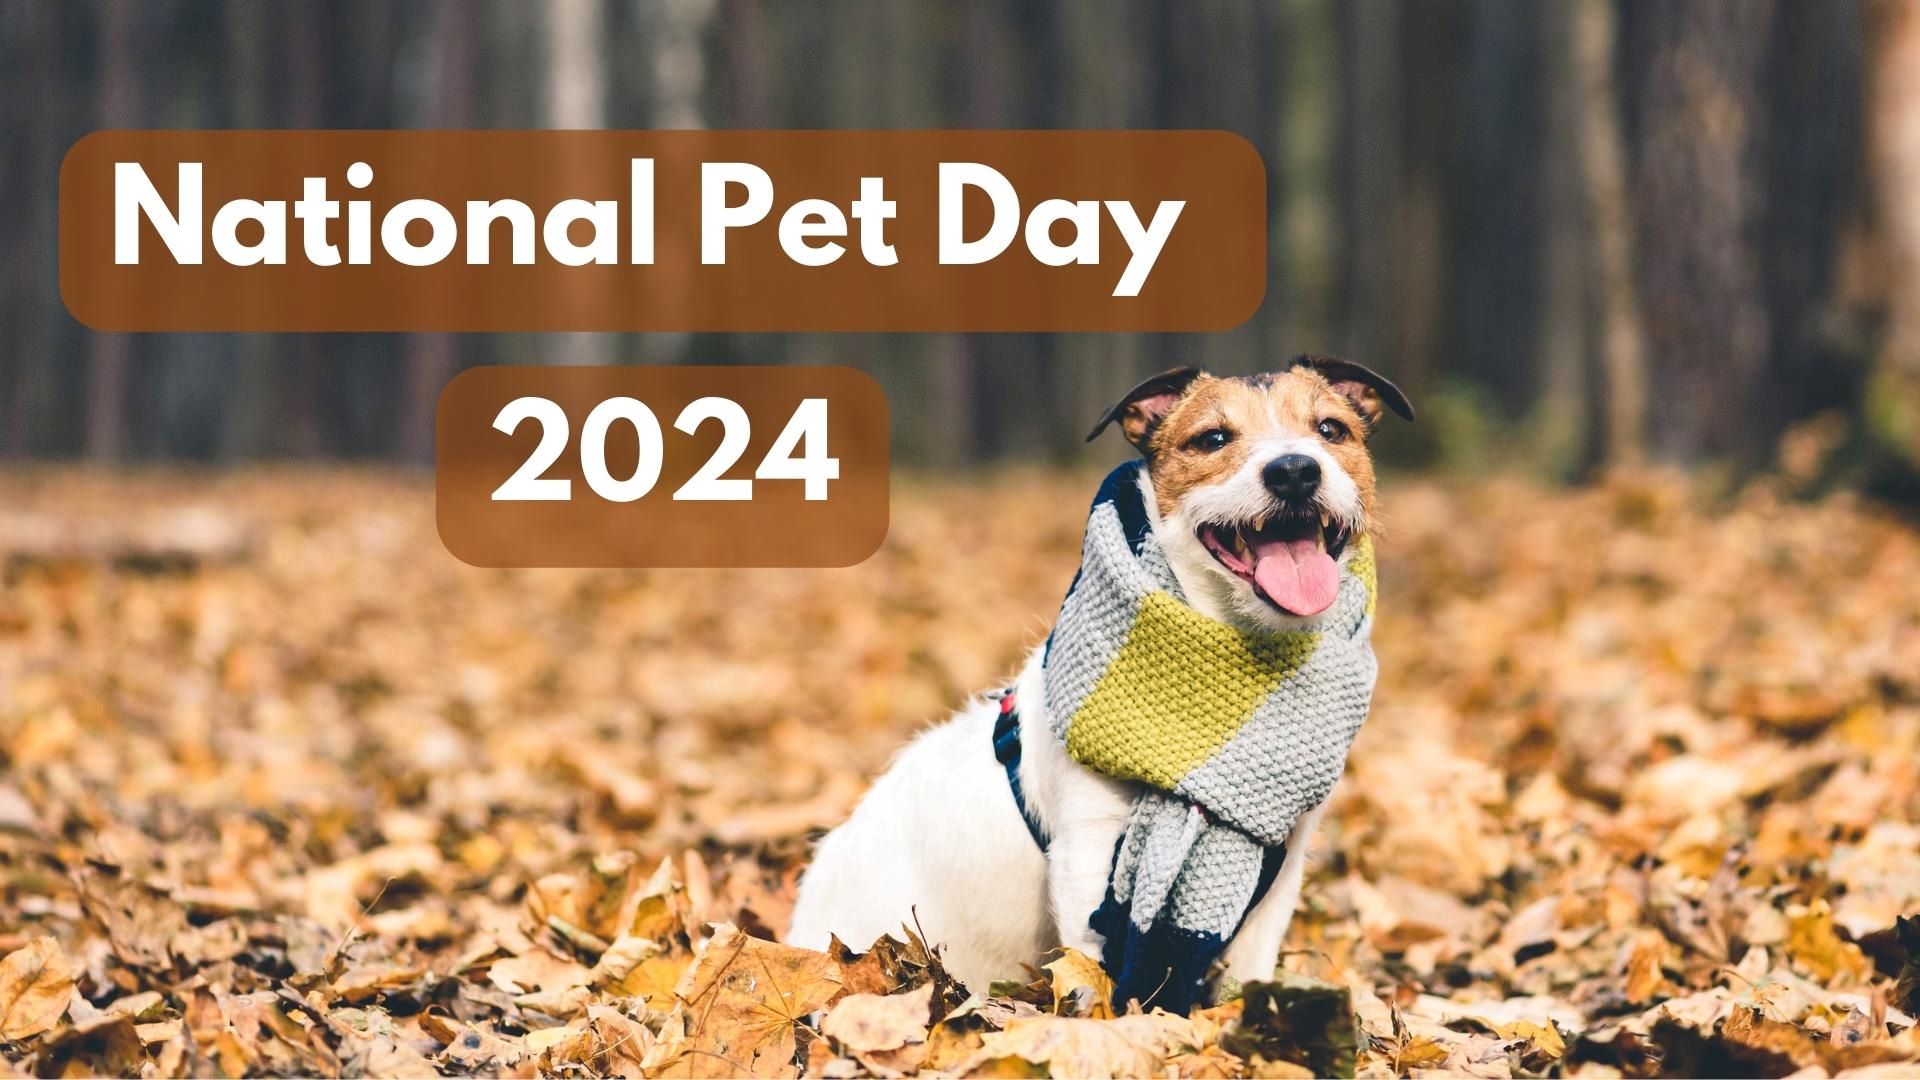 When Is National Pet Day Observed In 2024?